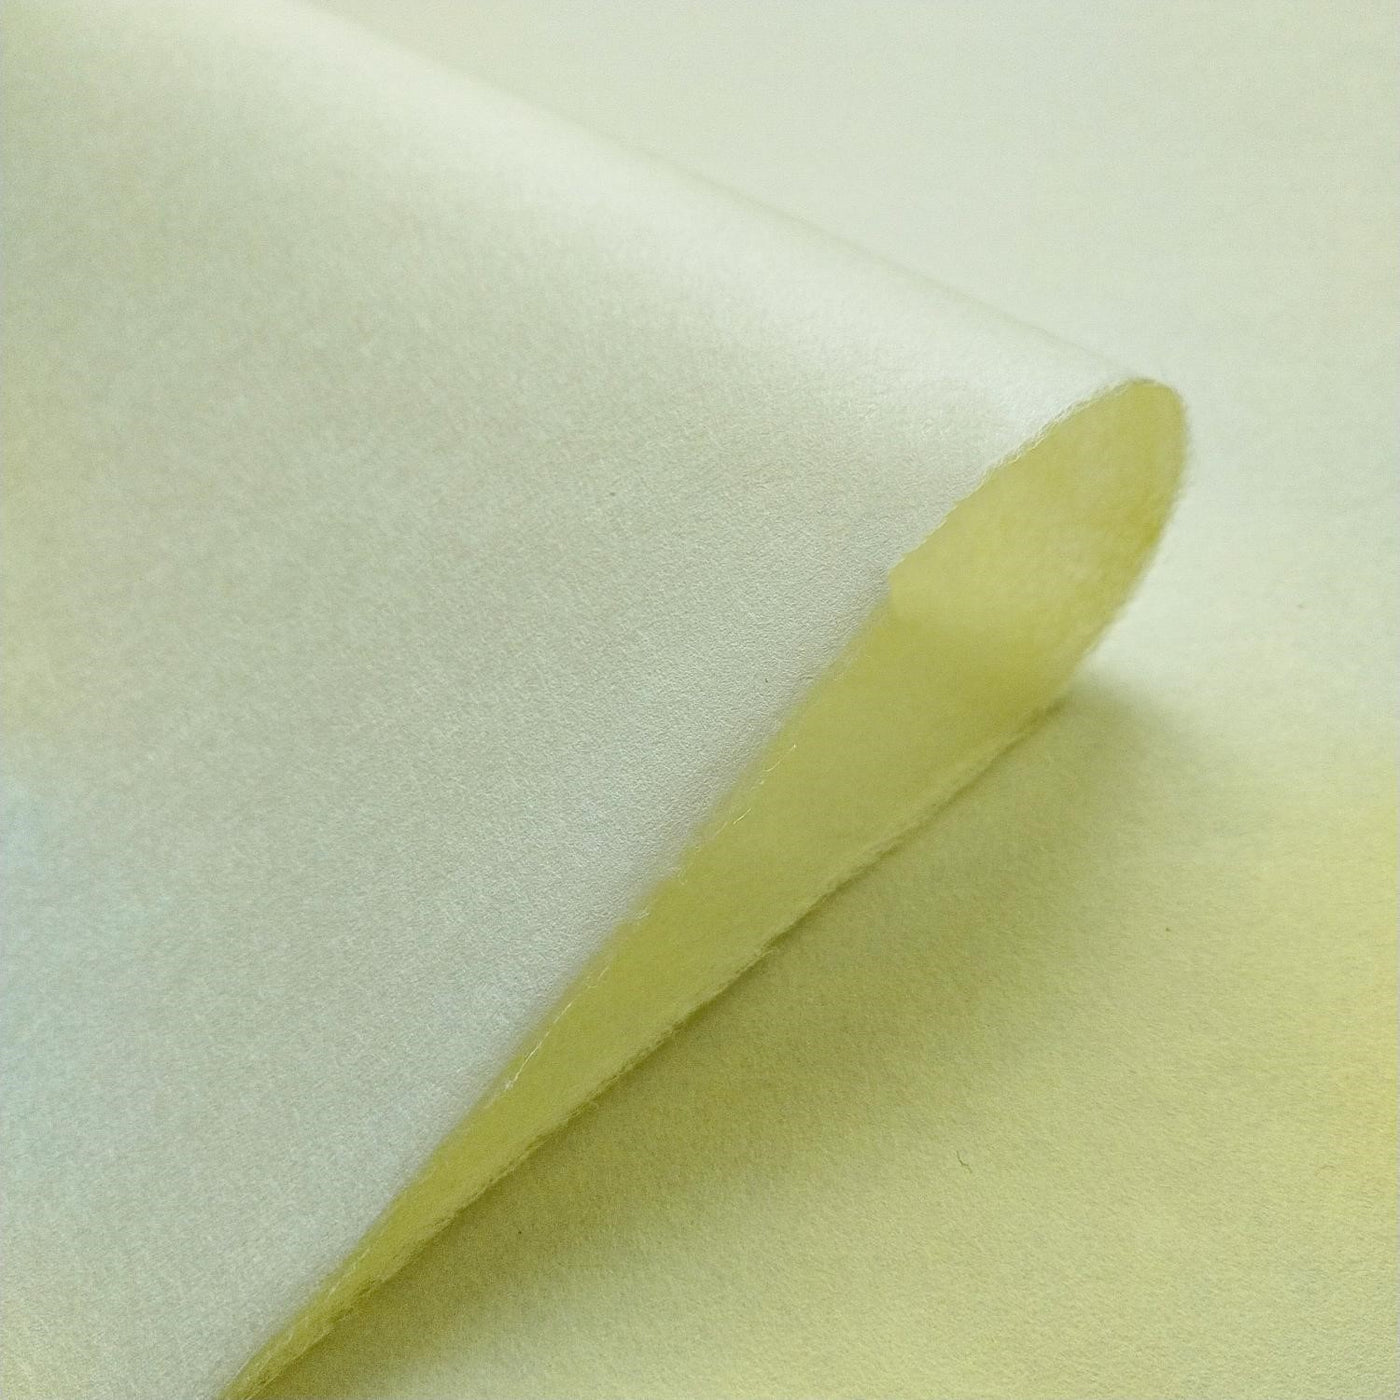 Solid-Colored Kozo Mulberry Paper (Lemon Yellow)